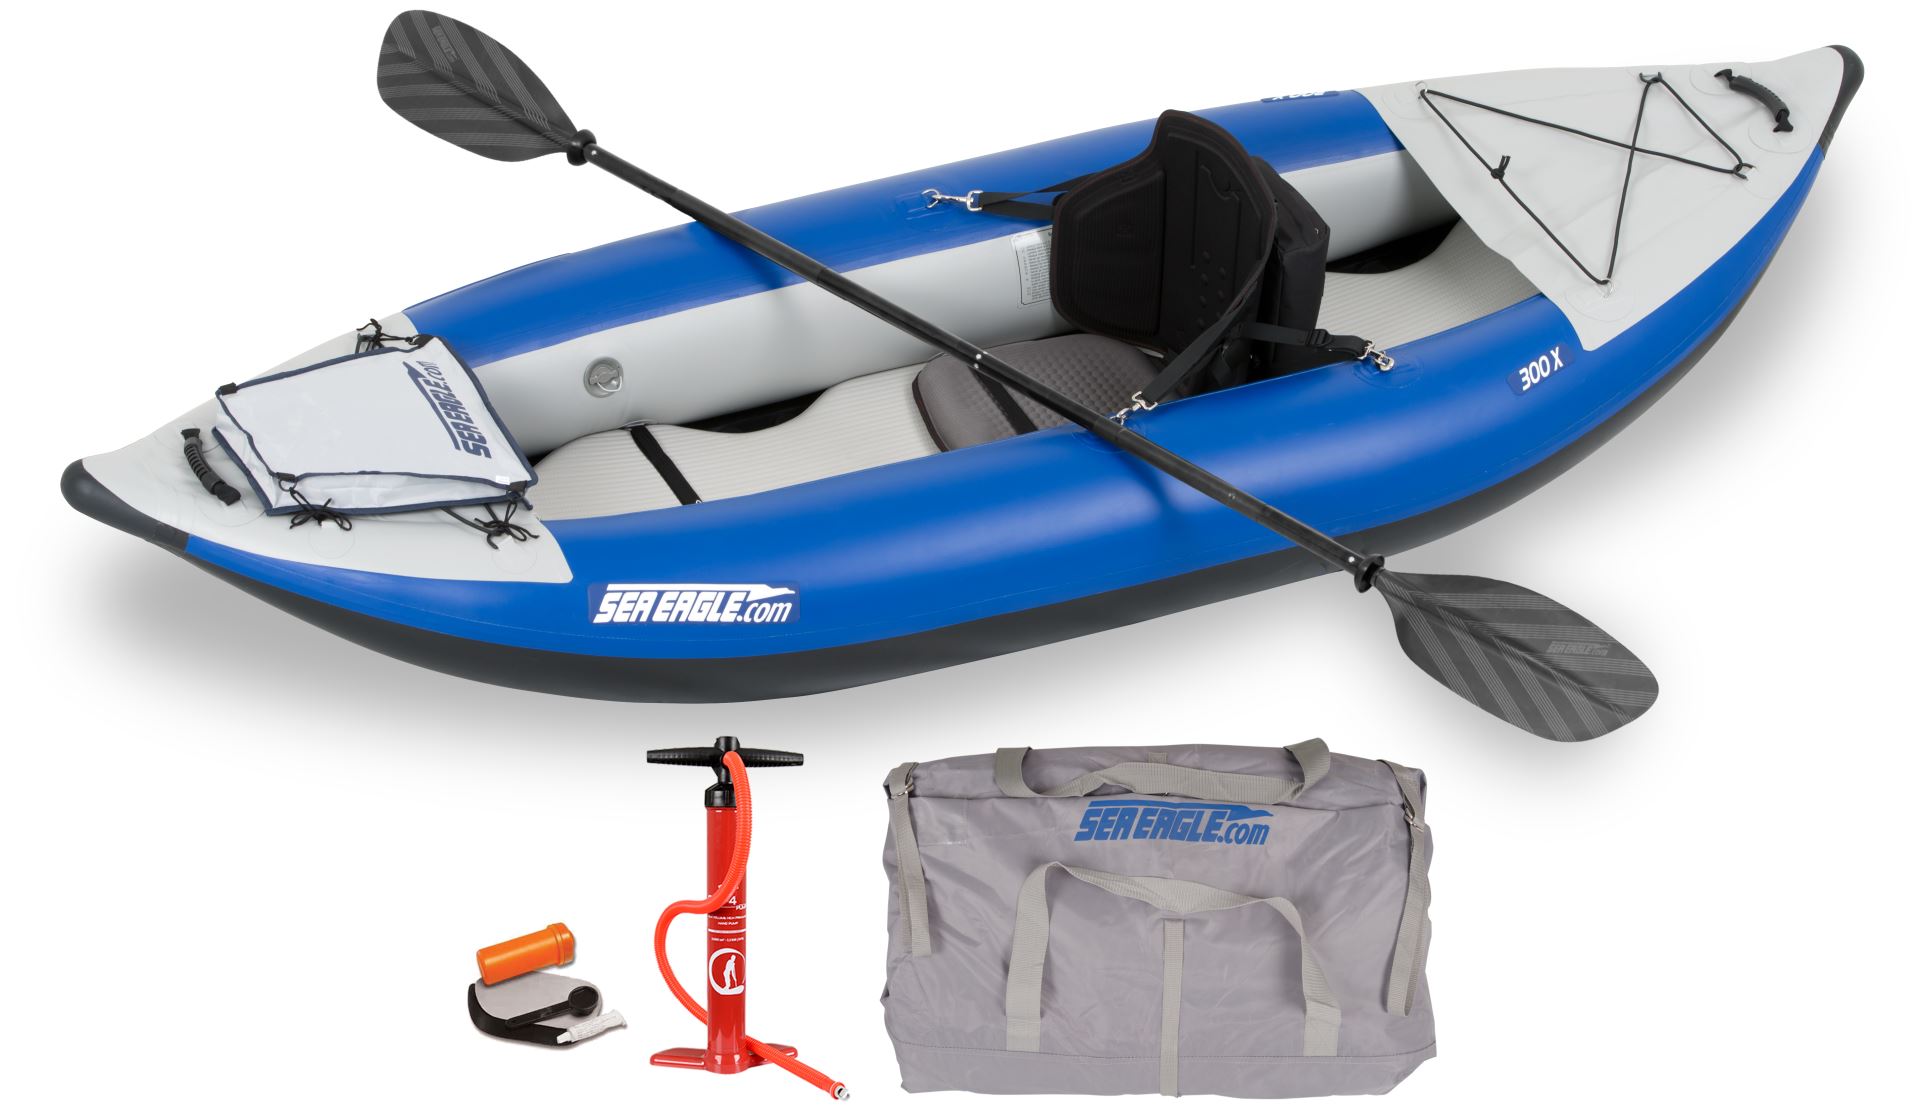 sea eagle 300x 1 person inflatable kayak. package prices